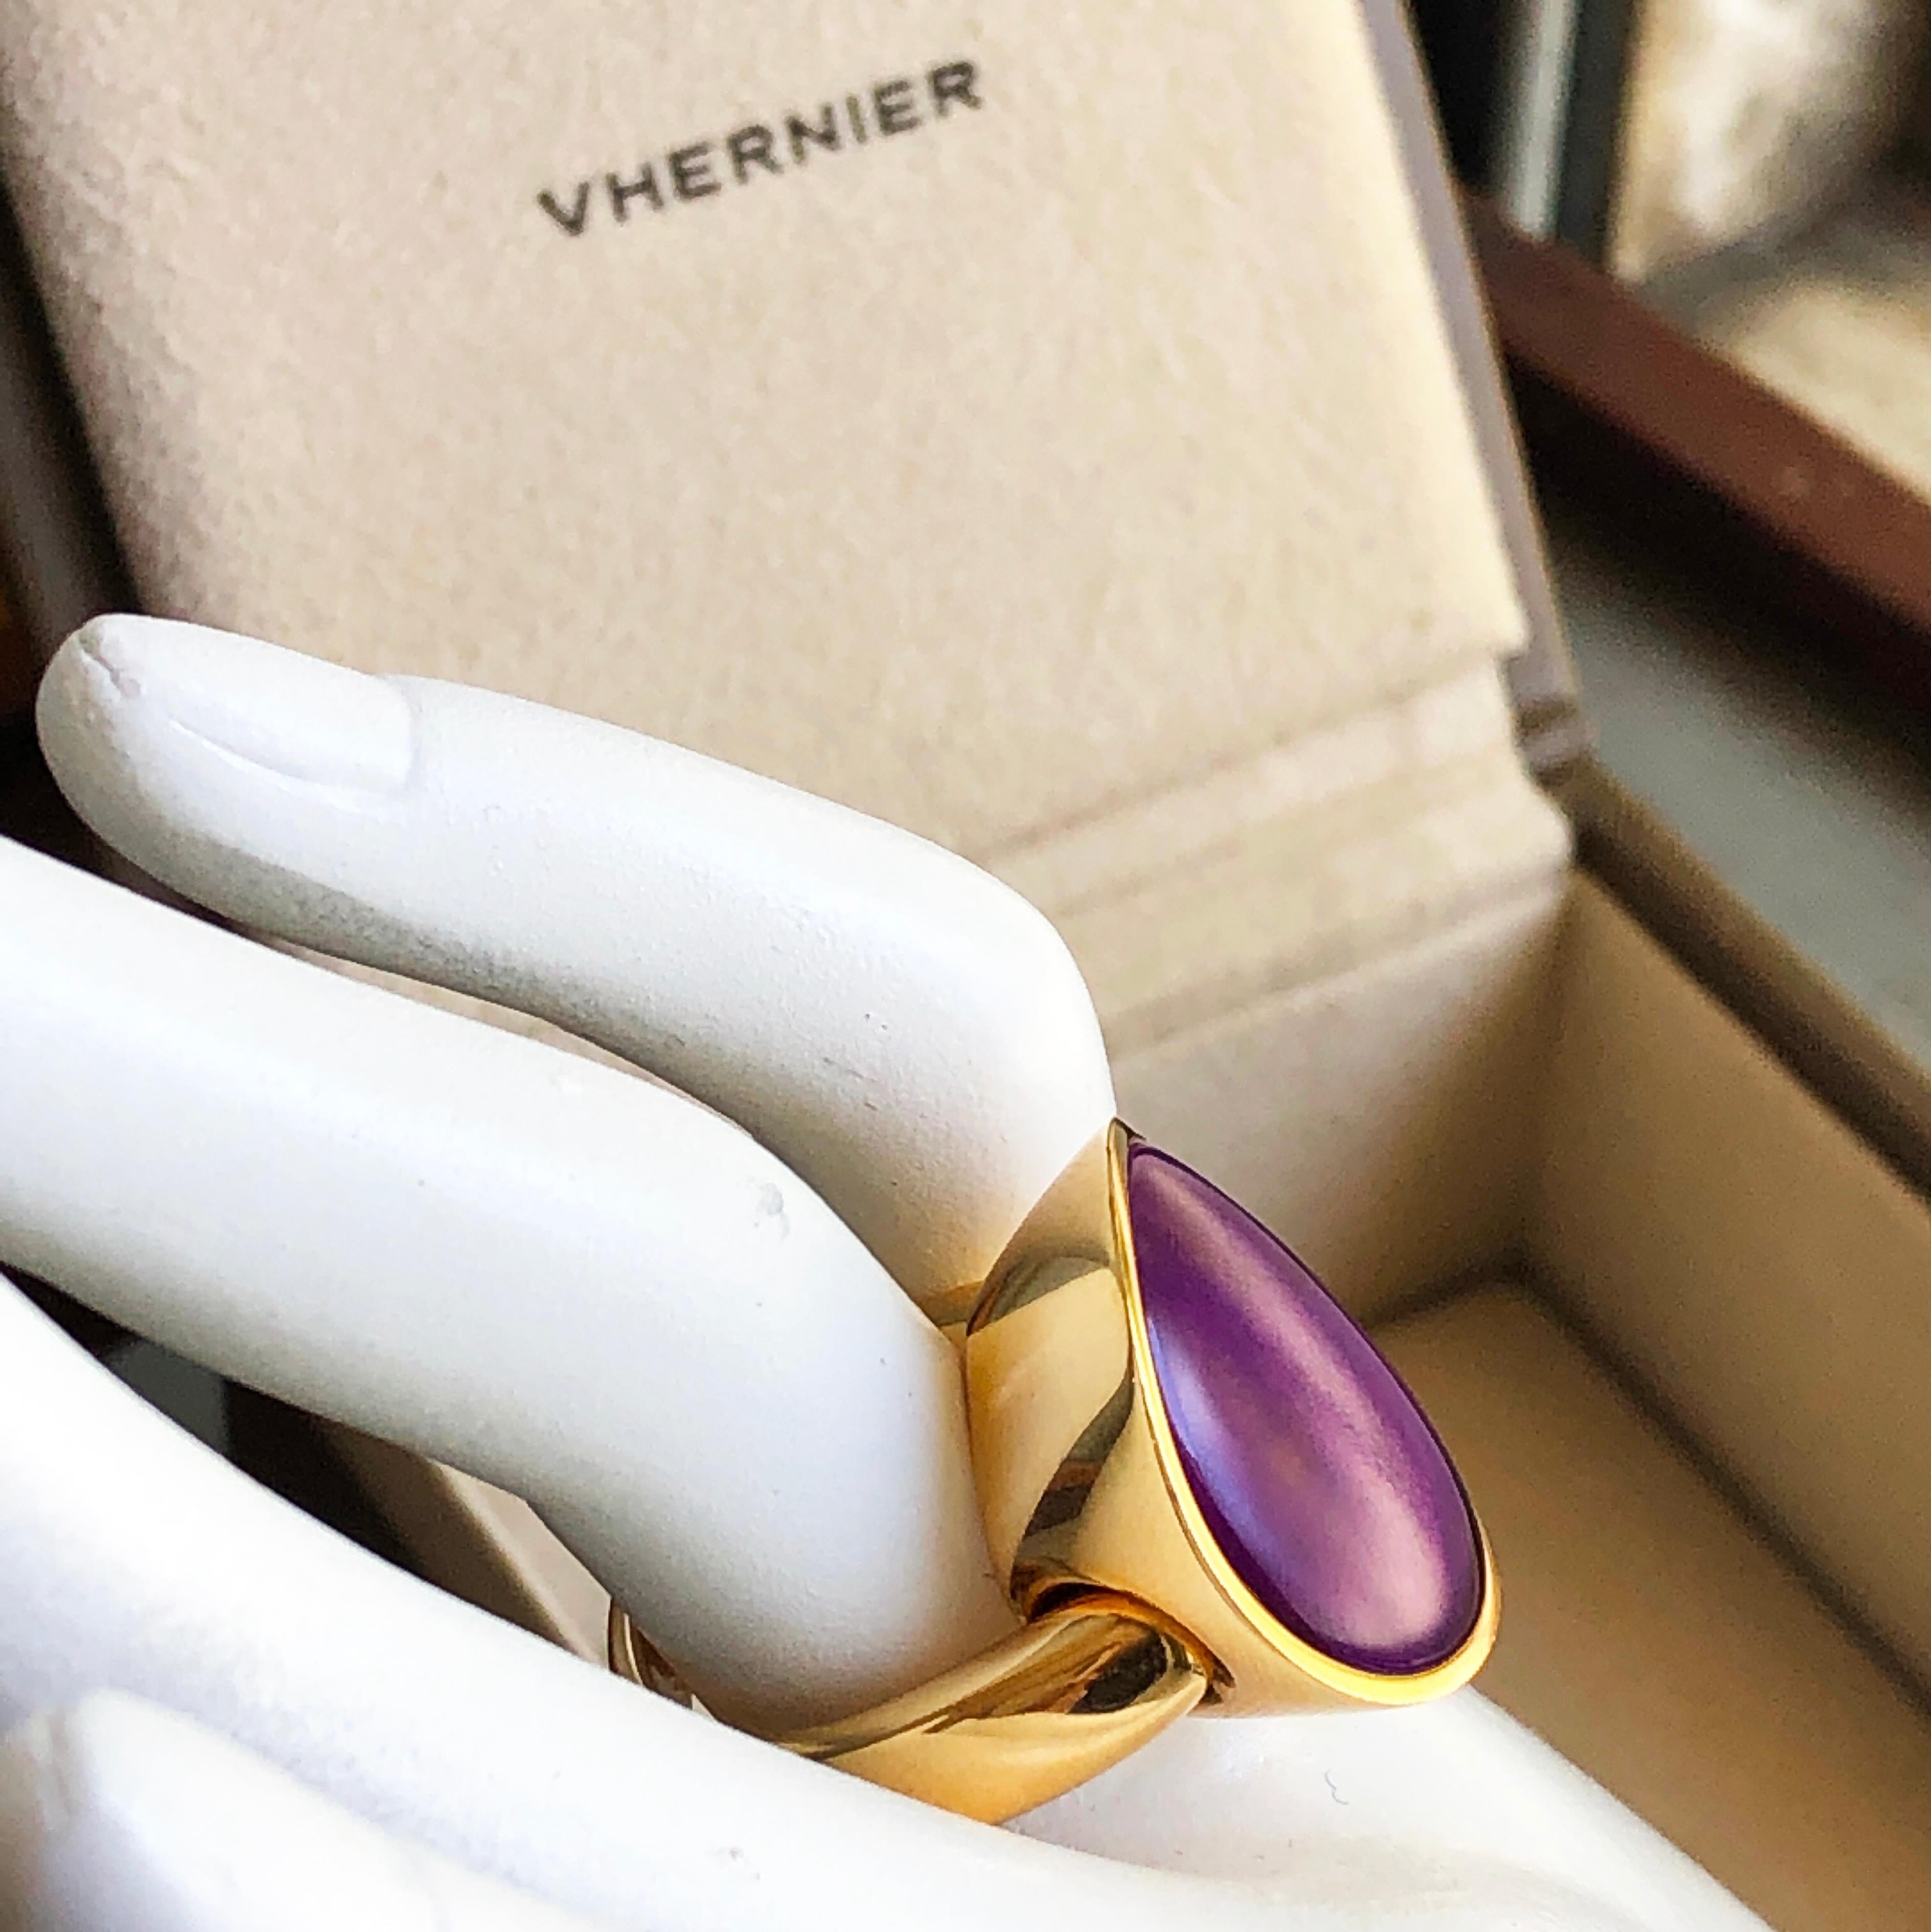 Cabochon Vhernier Rare Sugilite Rock Cystal Giotto Collection Yellow Gold Cocktail Ring